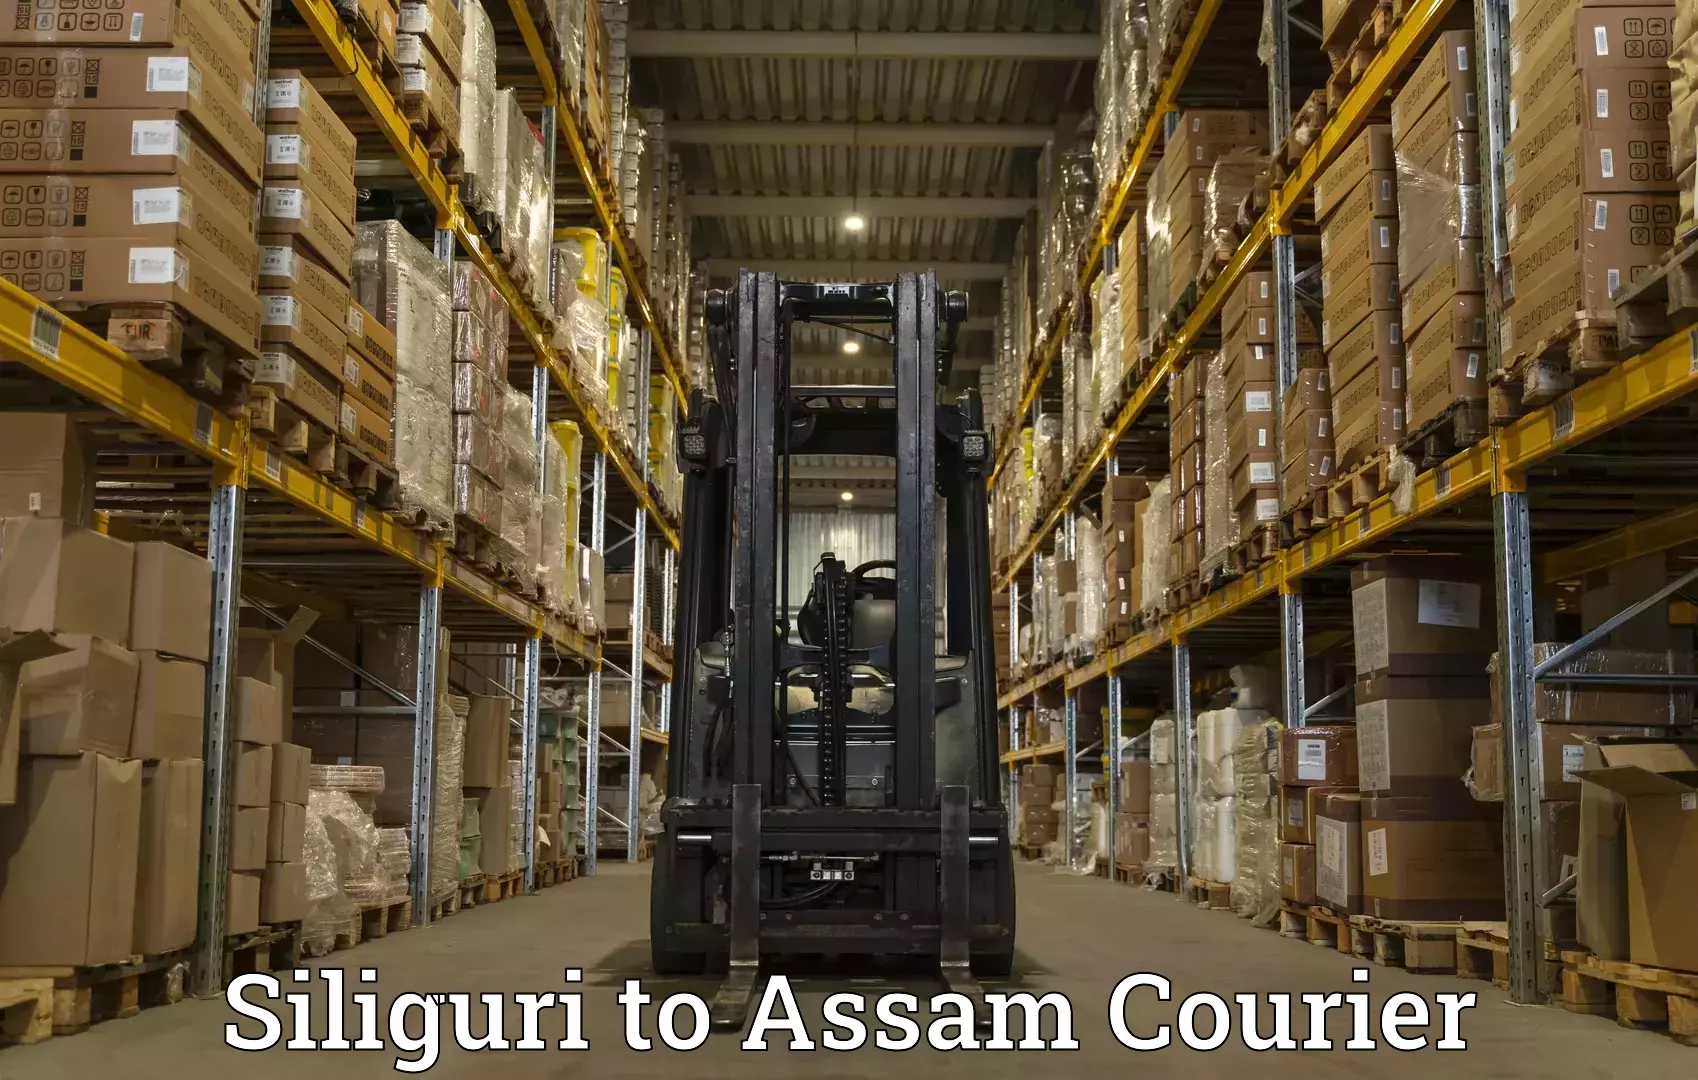 State-of-the-art courier technology in Siliguri to Kampur